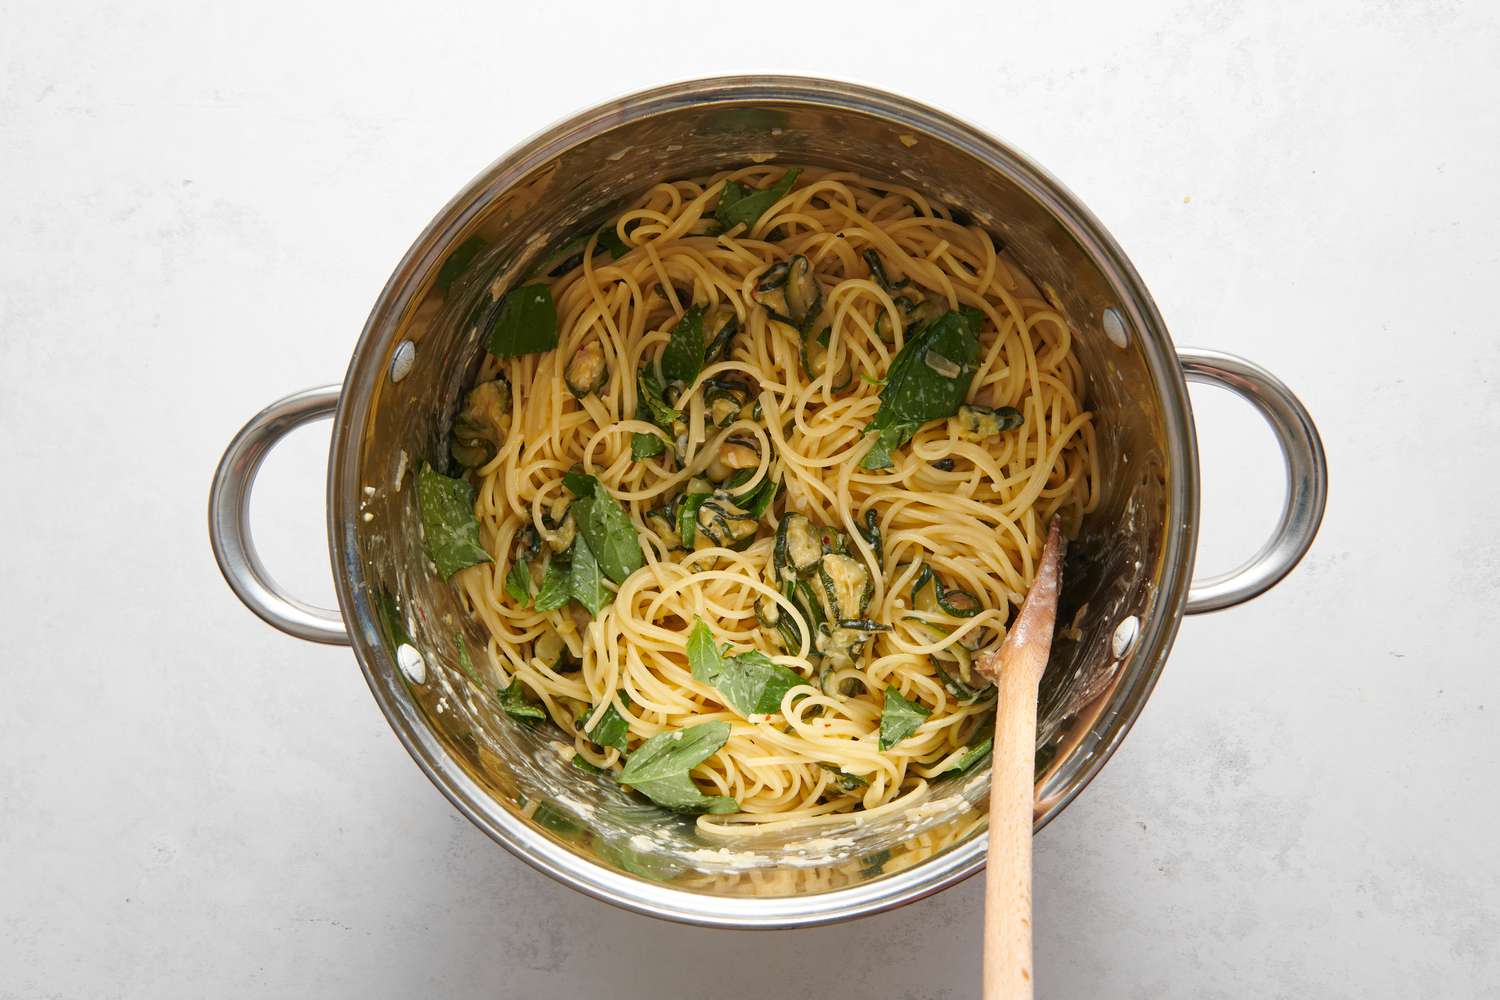 A pot of caramelized zucchini pasta topped with lemon juice and fresh basil leaves